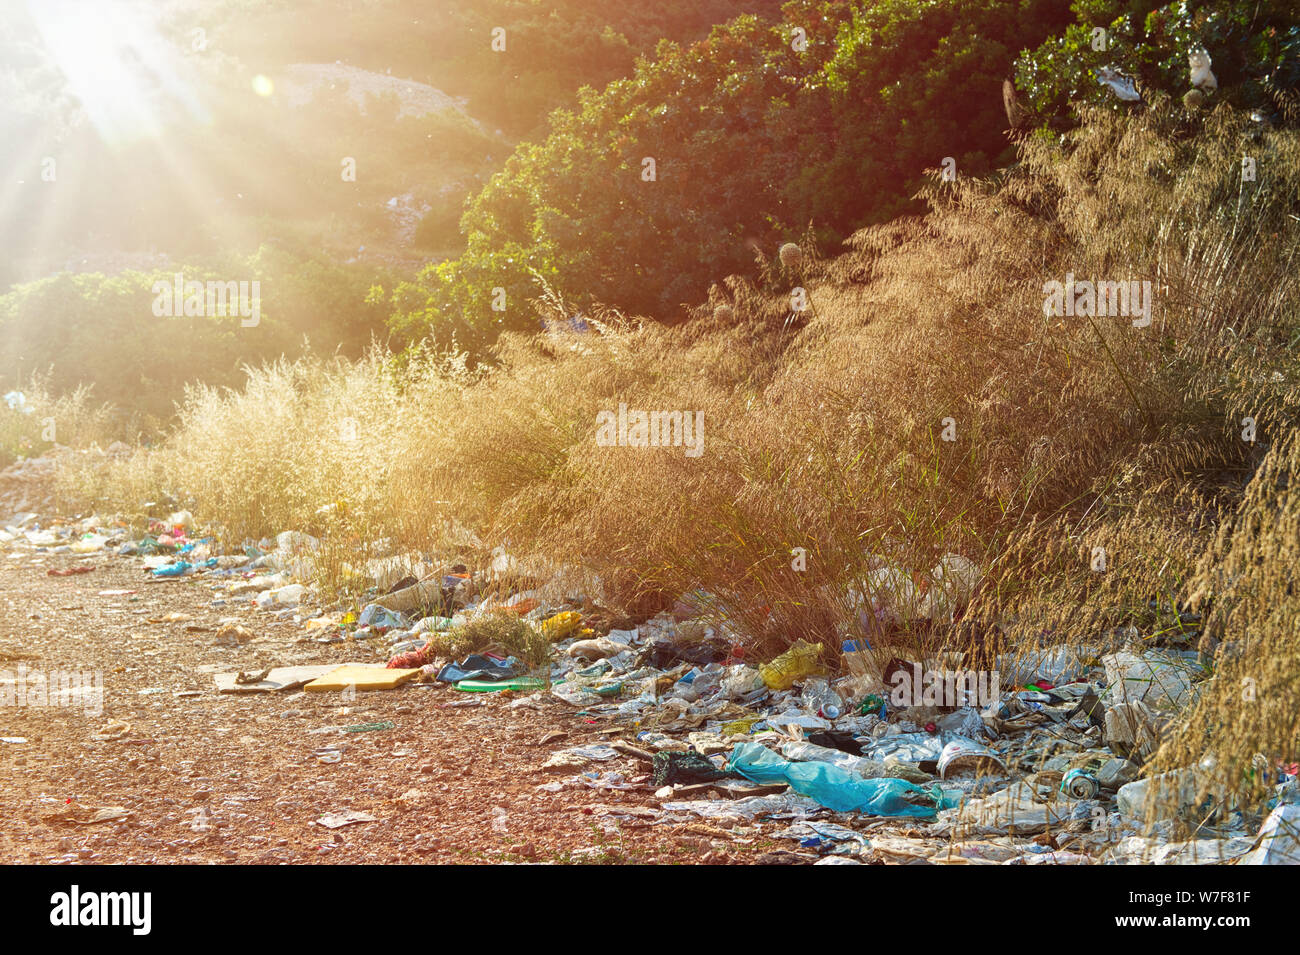 Illegal dumping of rubbish in natural enviroment. Fly tipping, bad waste mamagement, illegal landfill, enviromental issues. Stock Photo